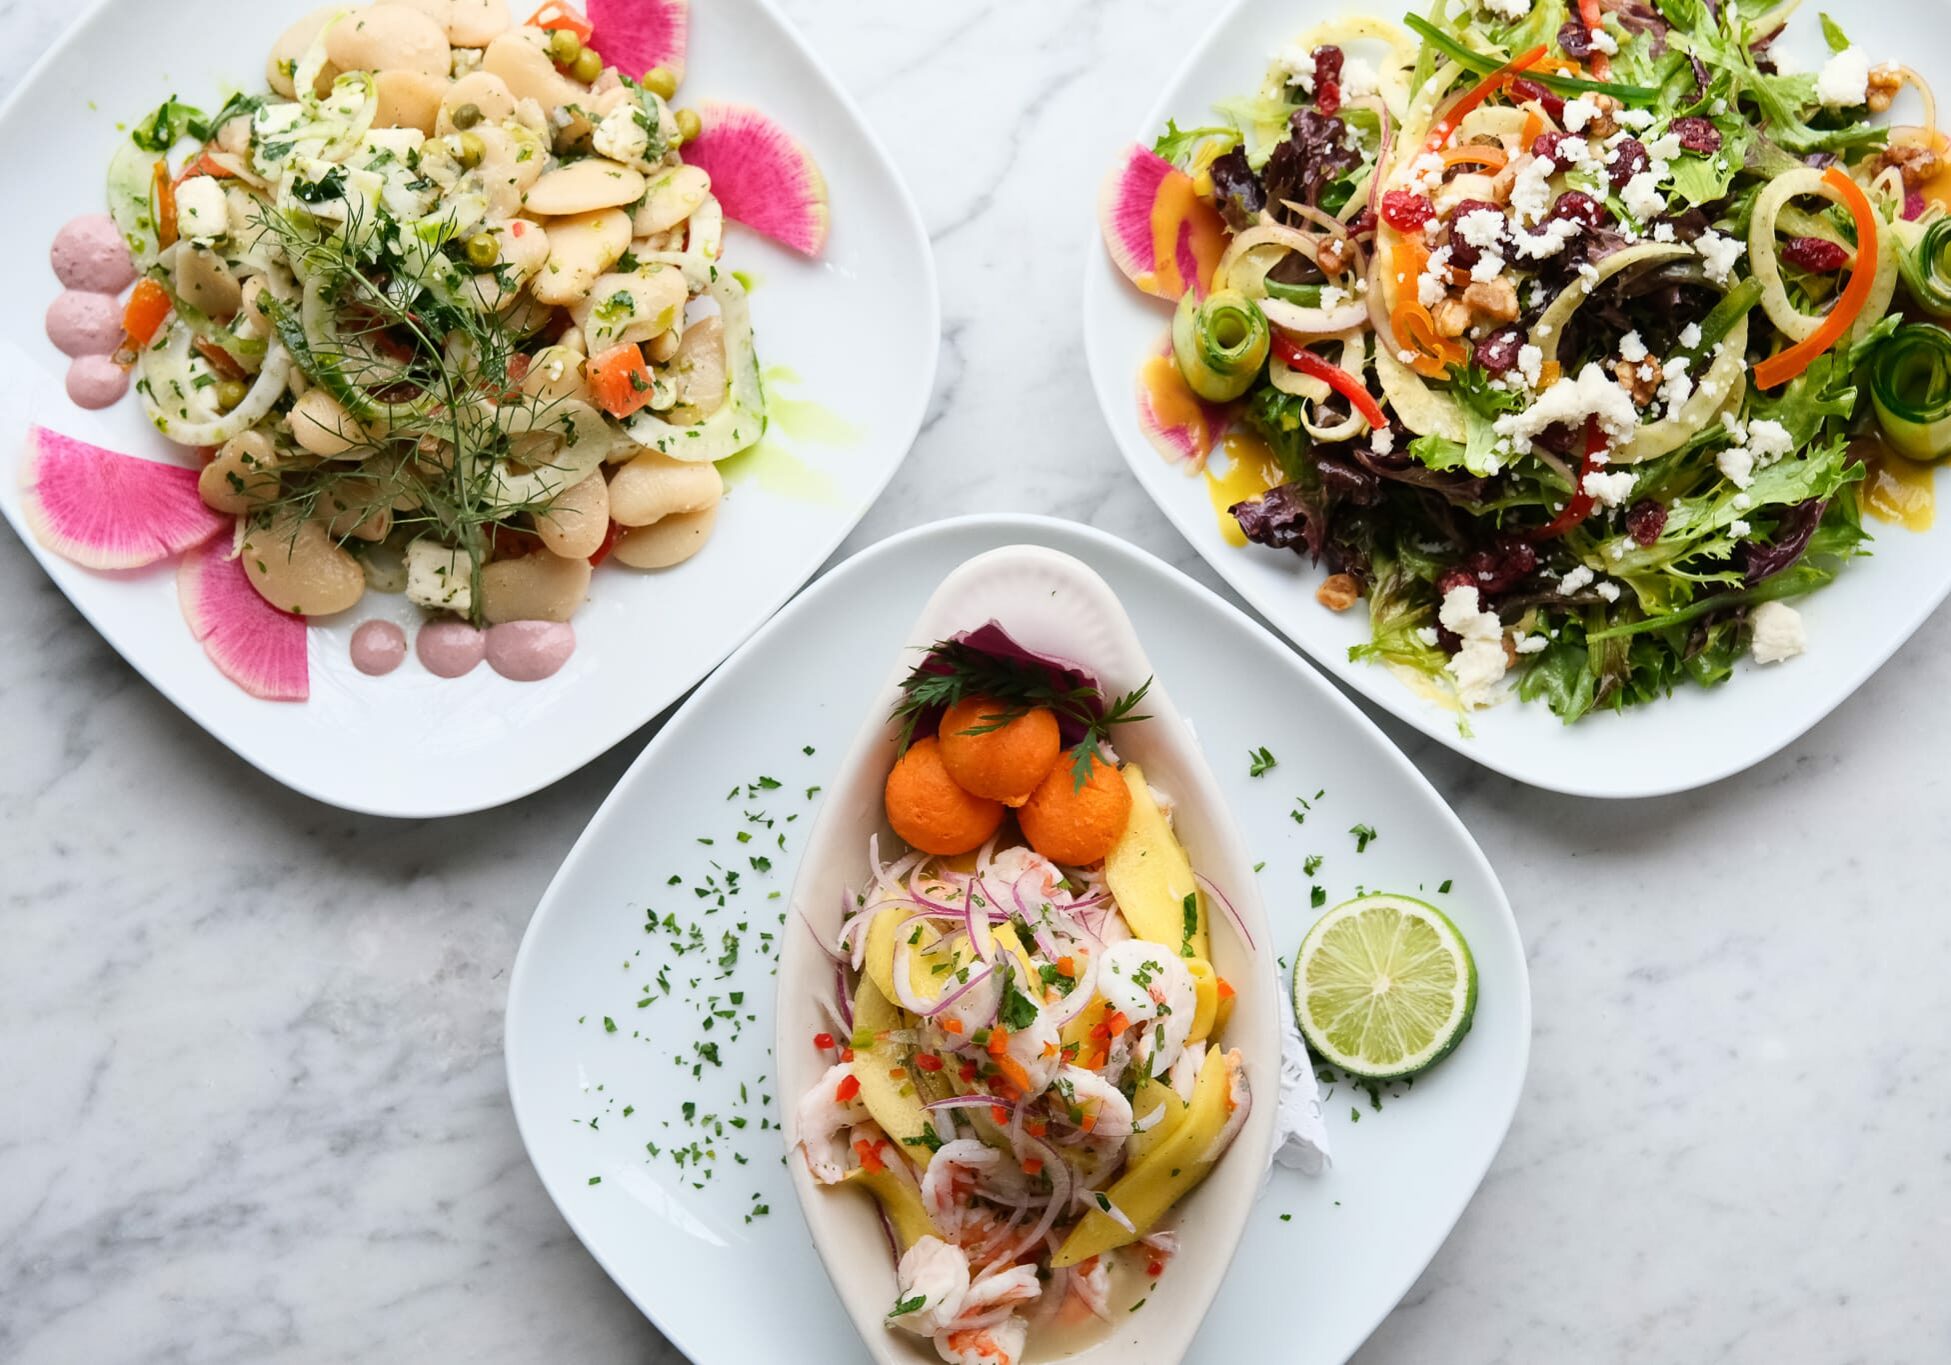 Plates of cannellini bean salad, shrimp and mango ceviche, and green salad